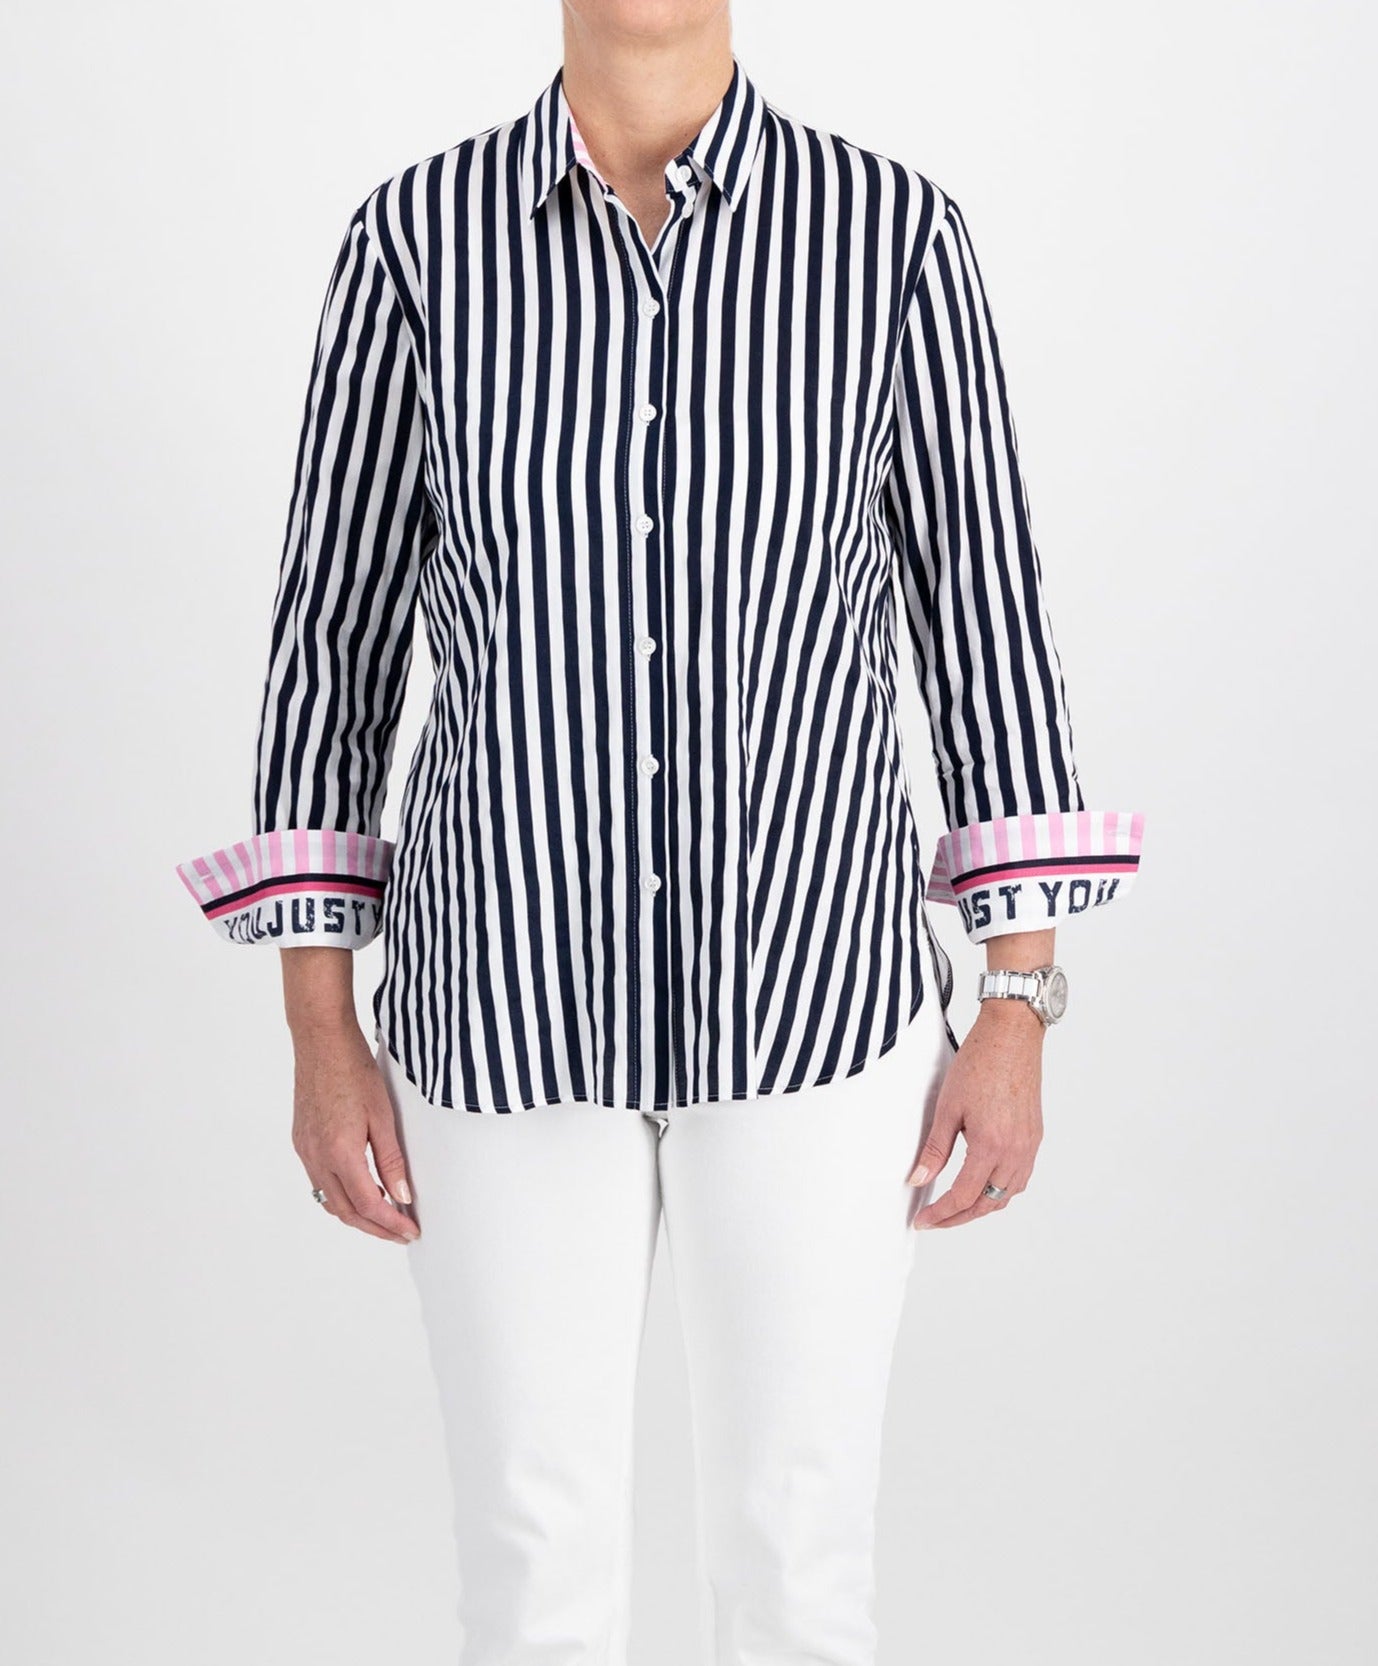 Navy & White Striped Shirt with Graphic Print Cuff